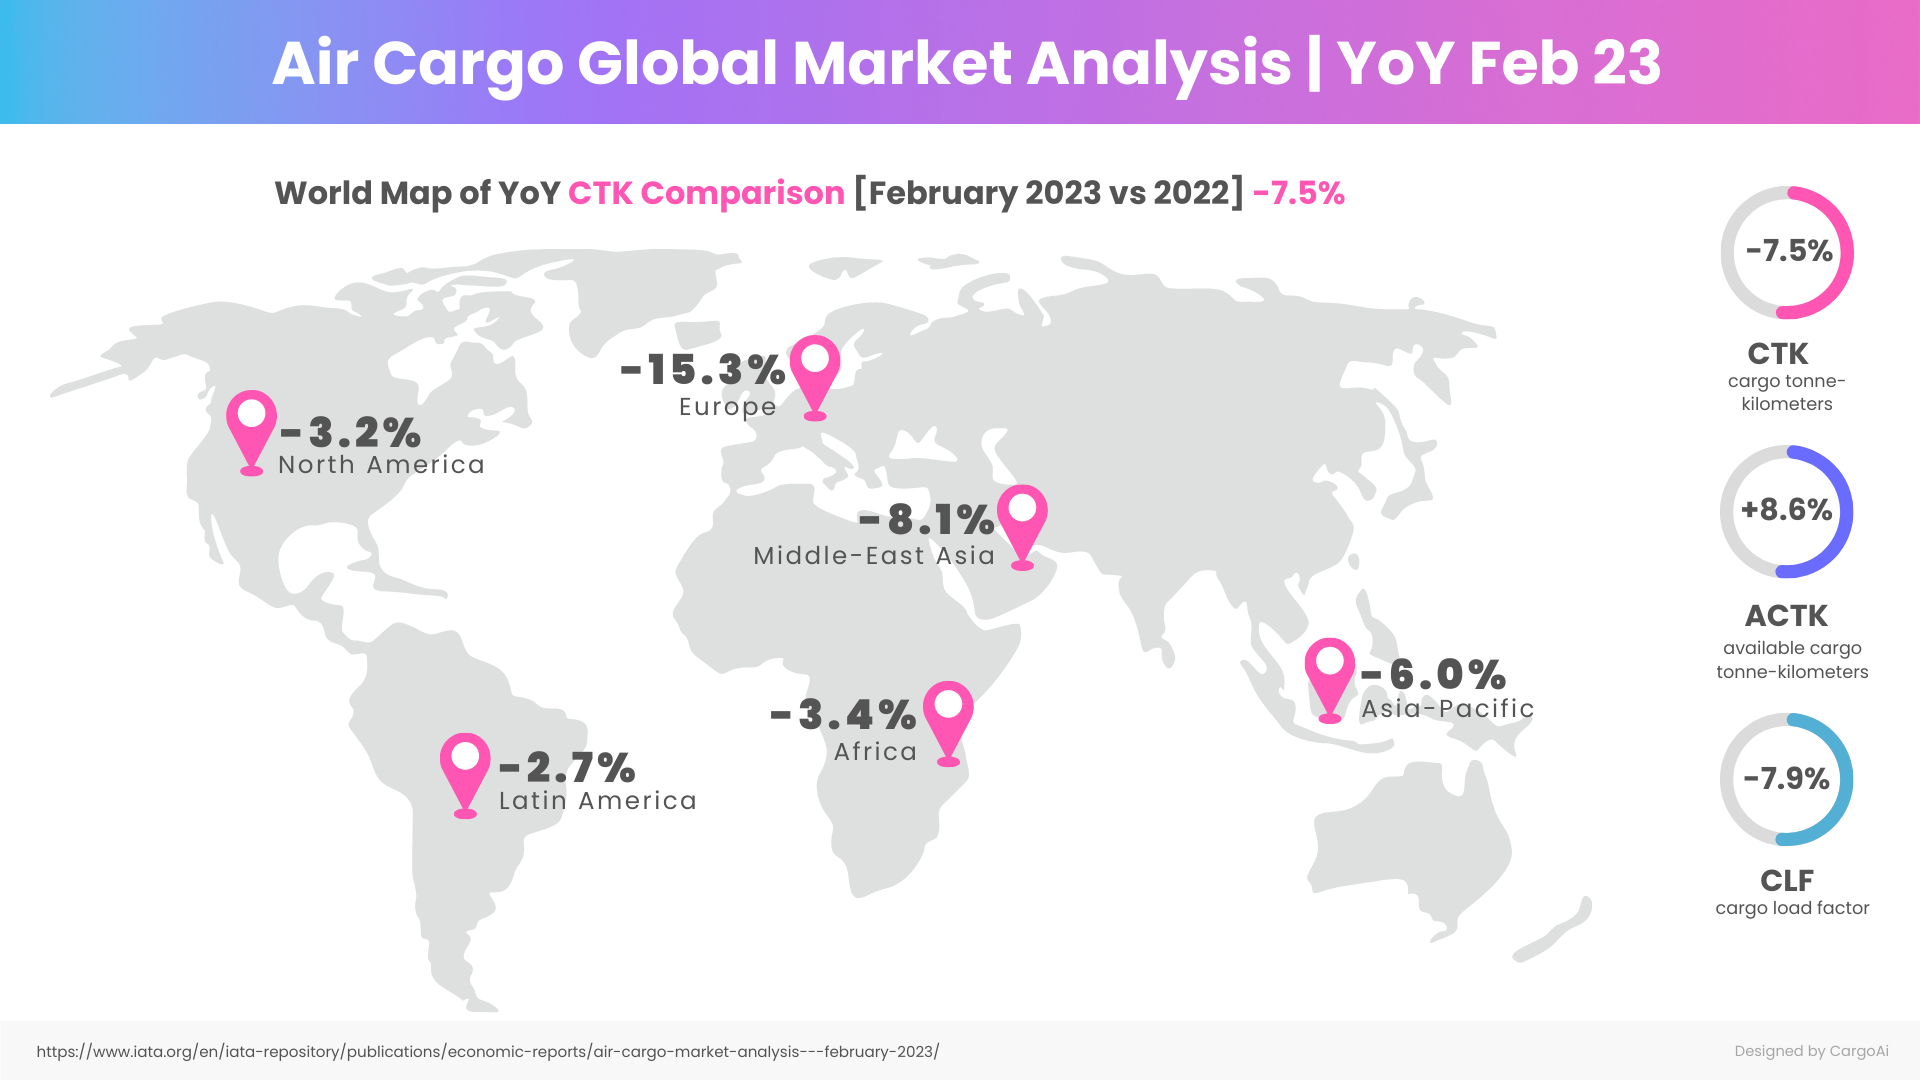 Air Cargo Global chargeable weight analysis of Mar 2023